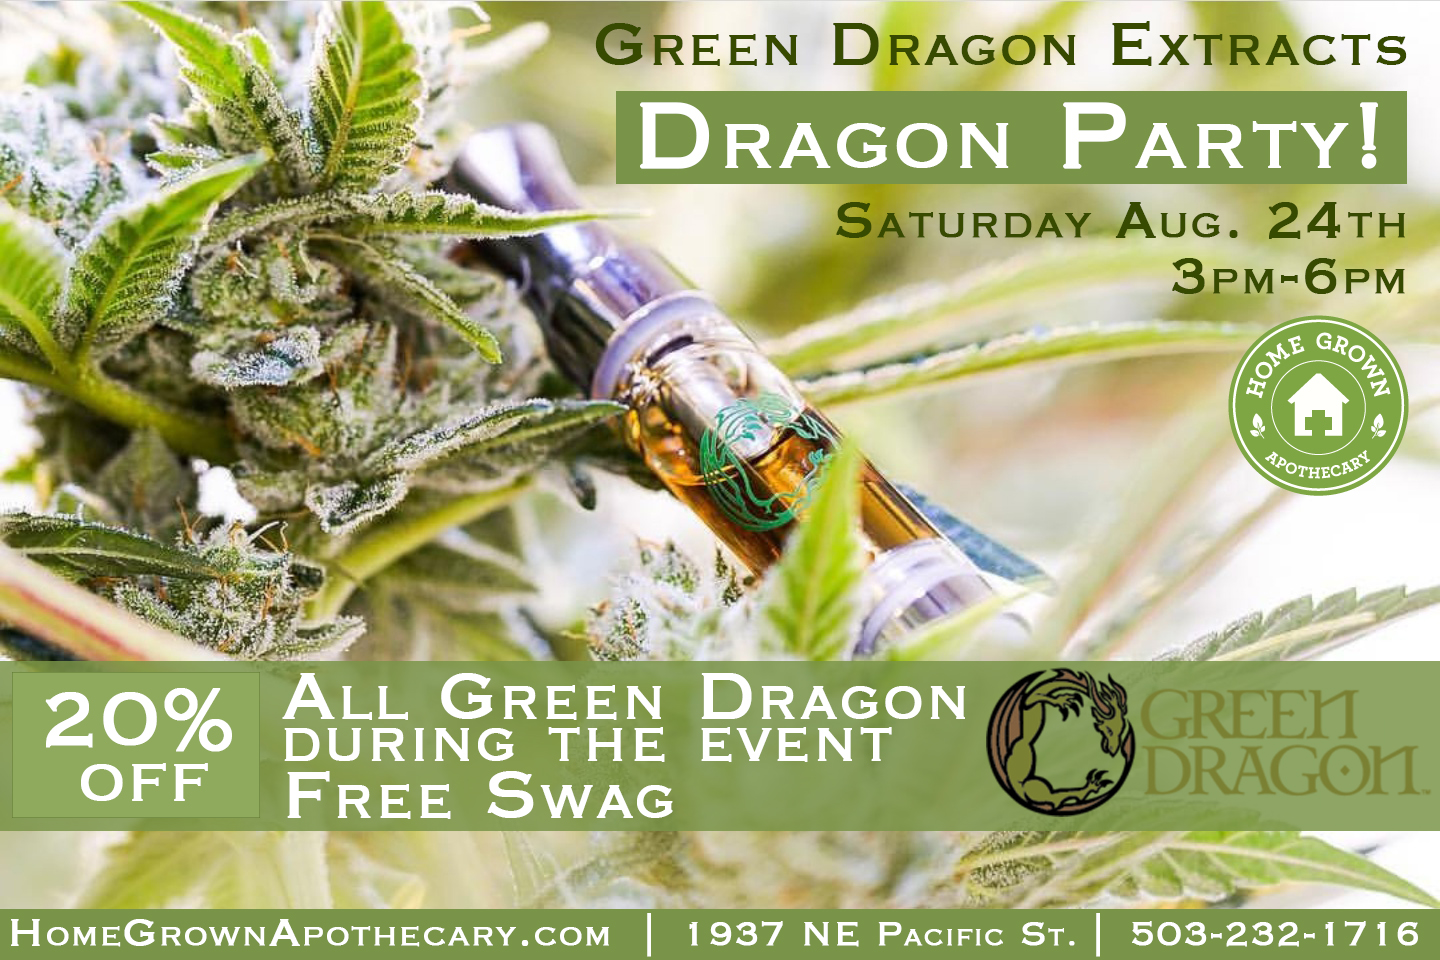 Green Dragon Dragon Party at Home Grown Apothecary, Vape Pens and Tinctures- Aug. 24th, 3-6pm